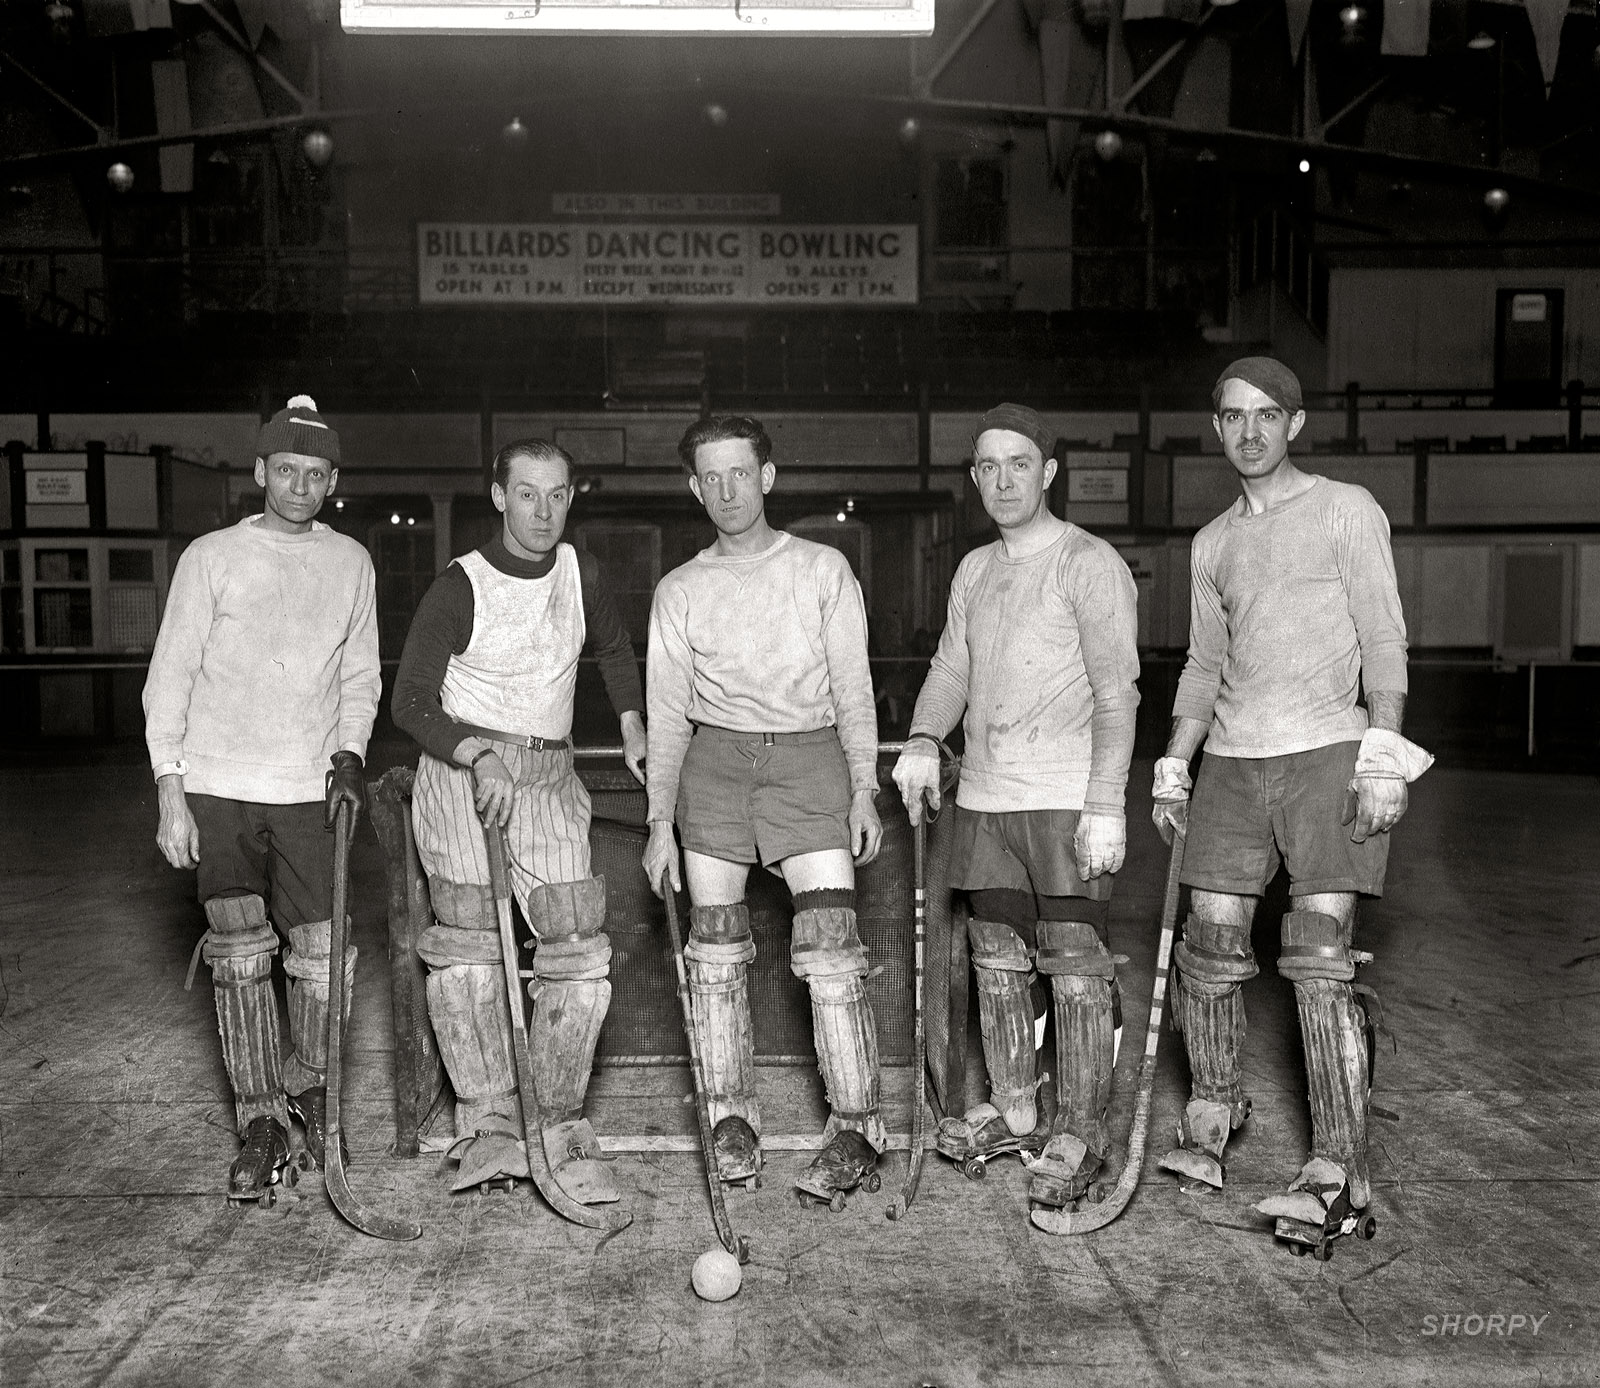 Washington, D.C. January 15, 1926. "Arcade Roller Hockey Club." National Photo Company Collection glass negative, Library of Congress. View full size.